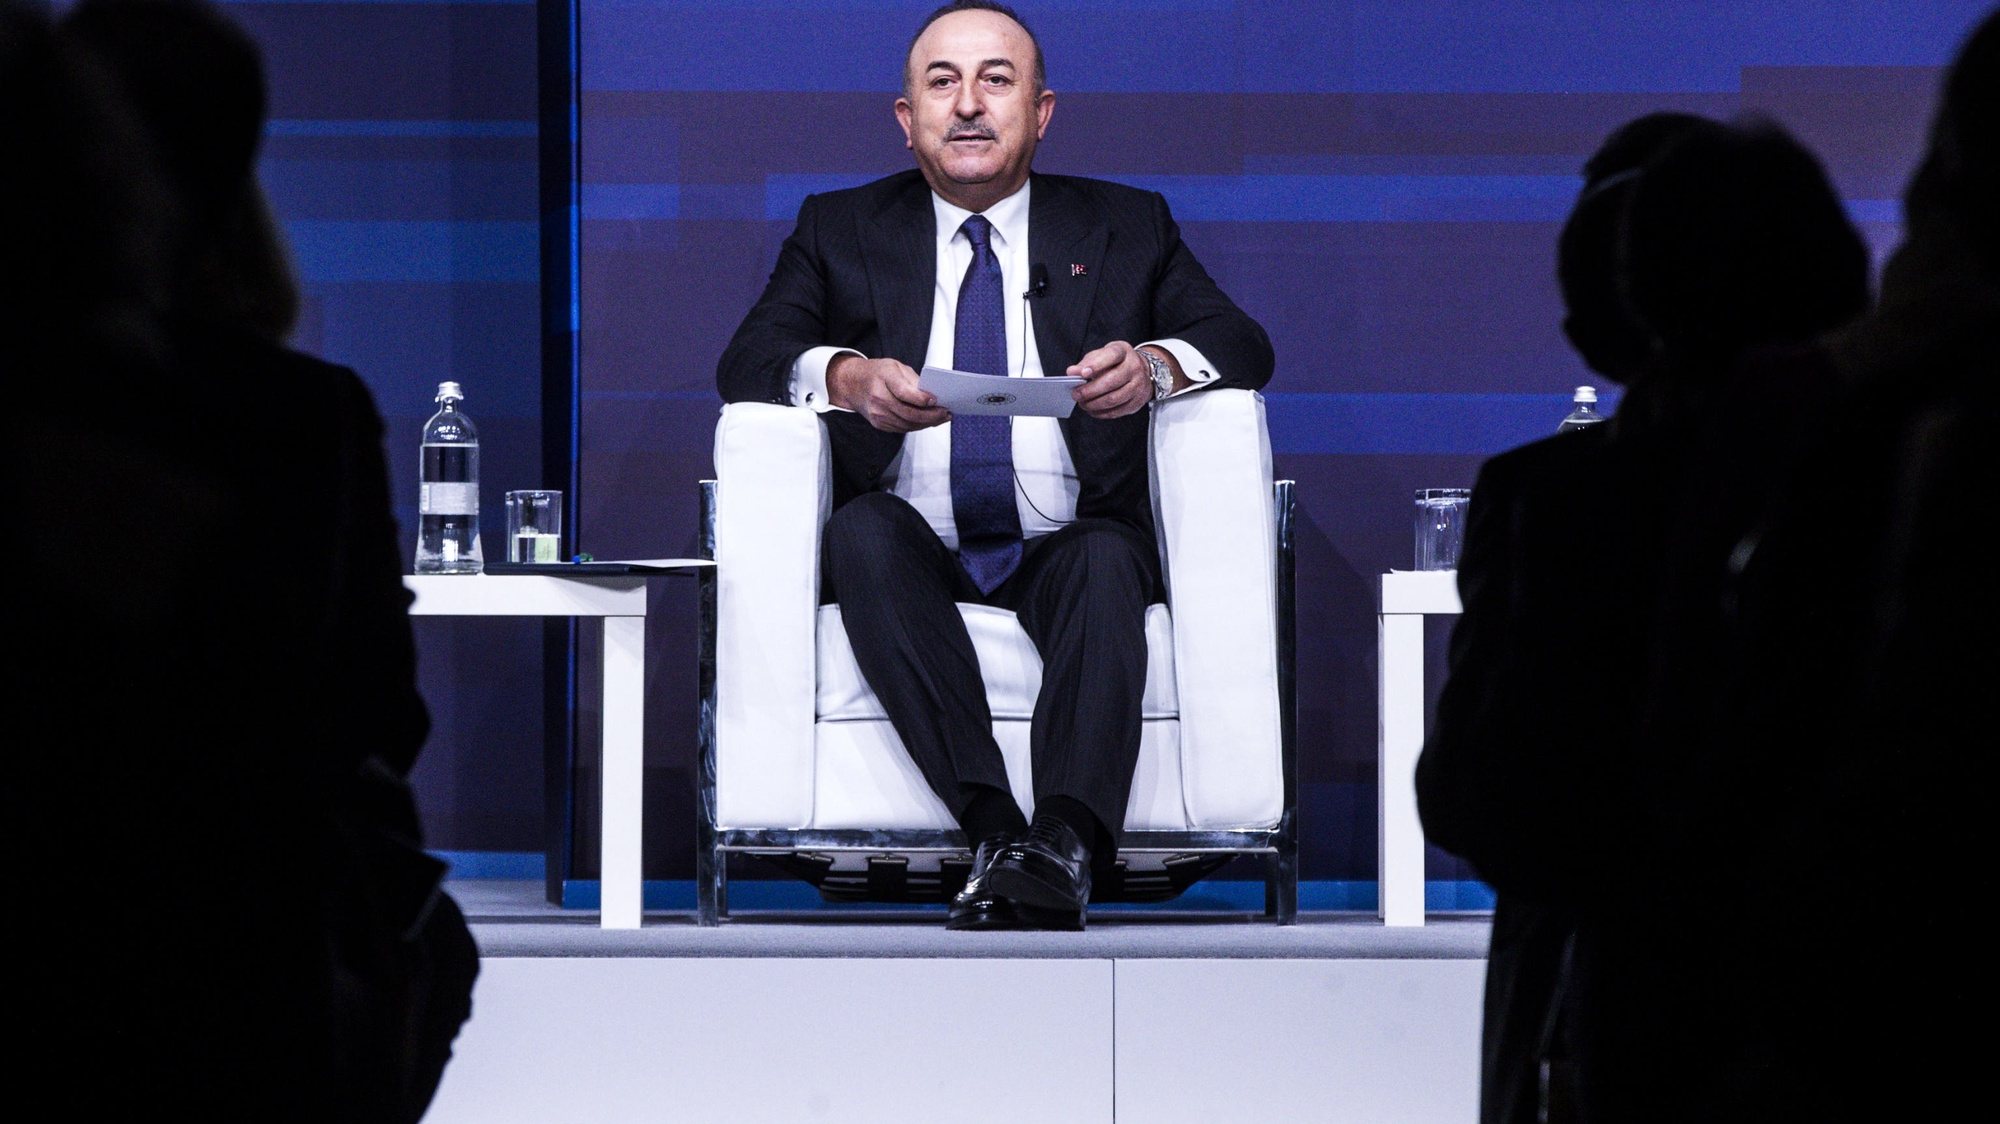 epa10344183 Turkish Foreign Minister Mevlut Cavusoglu attends a panel during the Rome Med 2022, Mediterranean Dialogues conference in Rome, Italy, 02 December 2022. The eighth edition of the MED - Rome Mediterranean Dialogues will focus on energy and food security in reference to the impact of the pandemic and war in Ukraine on the region. The annual high-level initiative, organized by the Italian Ministry of Foreign Affairs and International Cooperation and ISPI (Italian Institute for International Political Studies) in Rome, aims at addressing issues at the regional and international level.  EPA/CLAUDIO PERI ITALY OUT